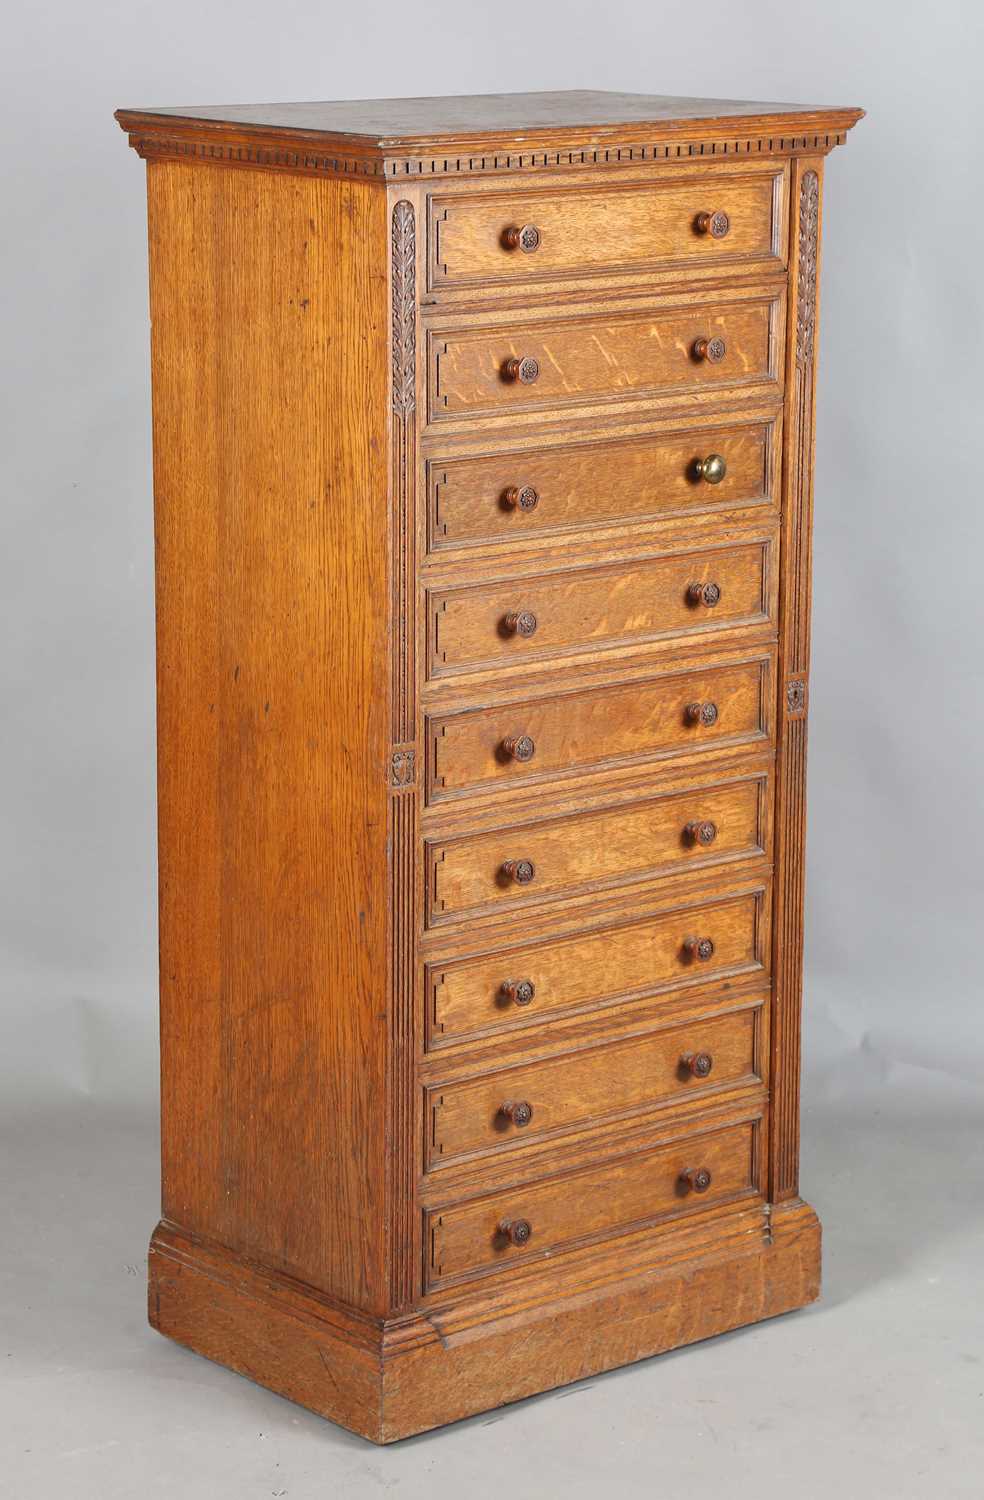 A fine Edwardian oak Wellington chest of nine drawers, probably by Gillows or Holland & Sons, the